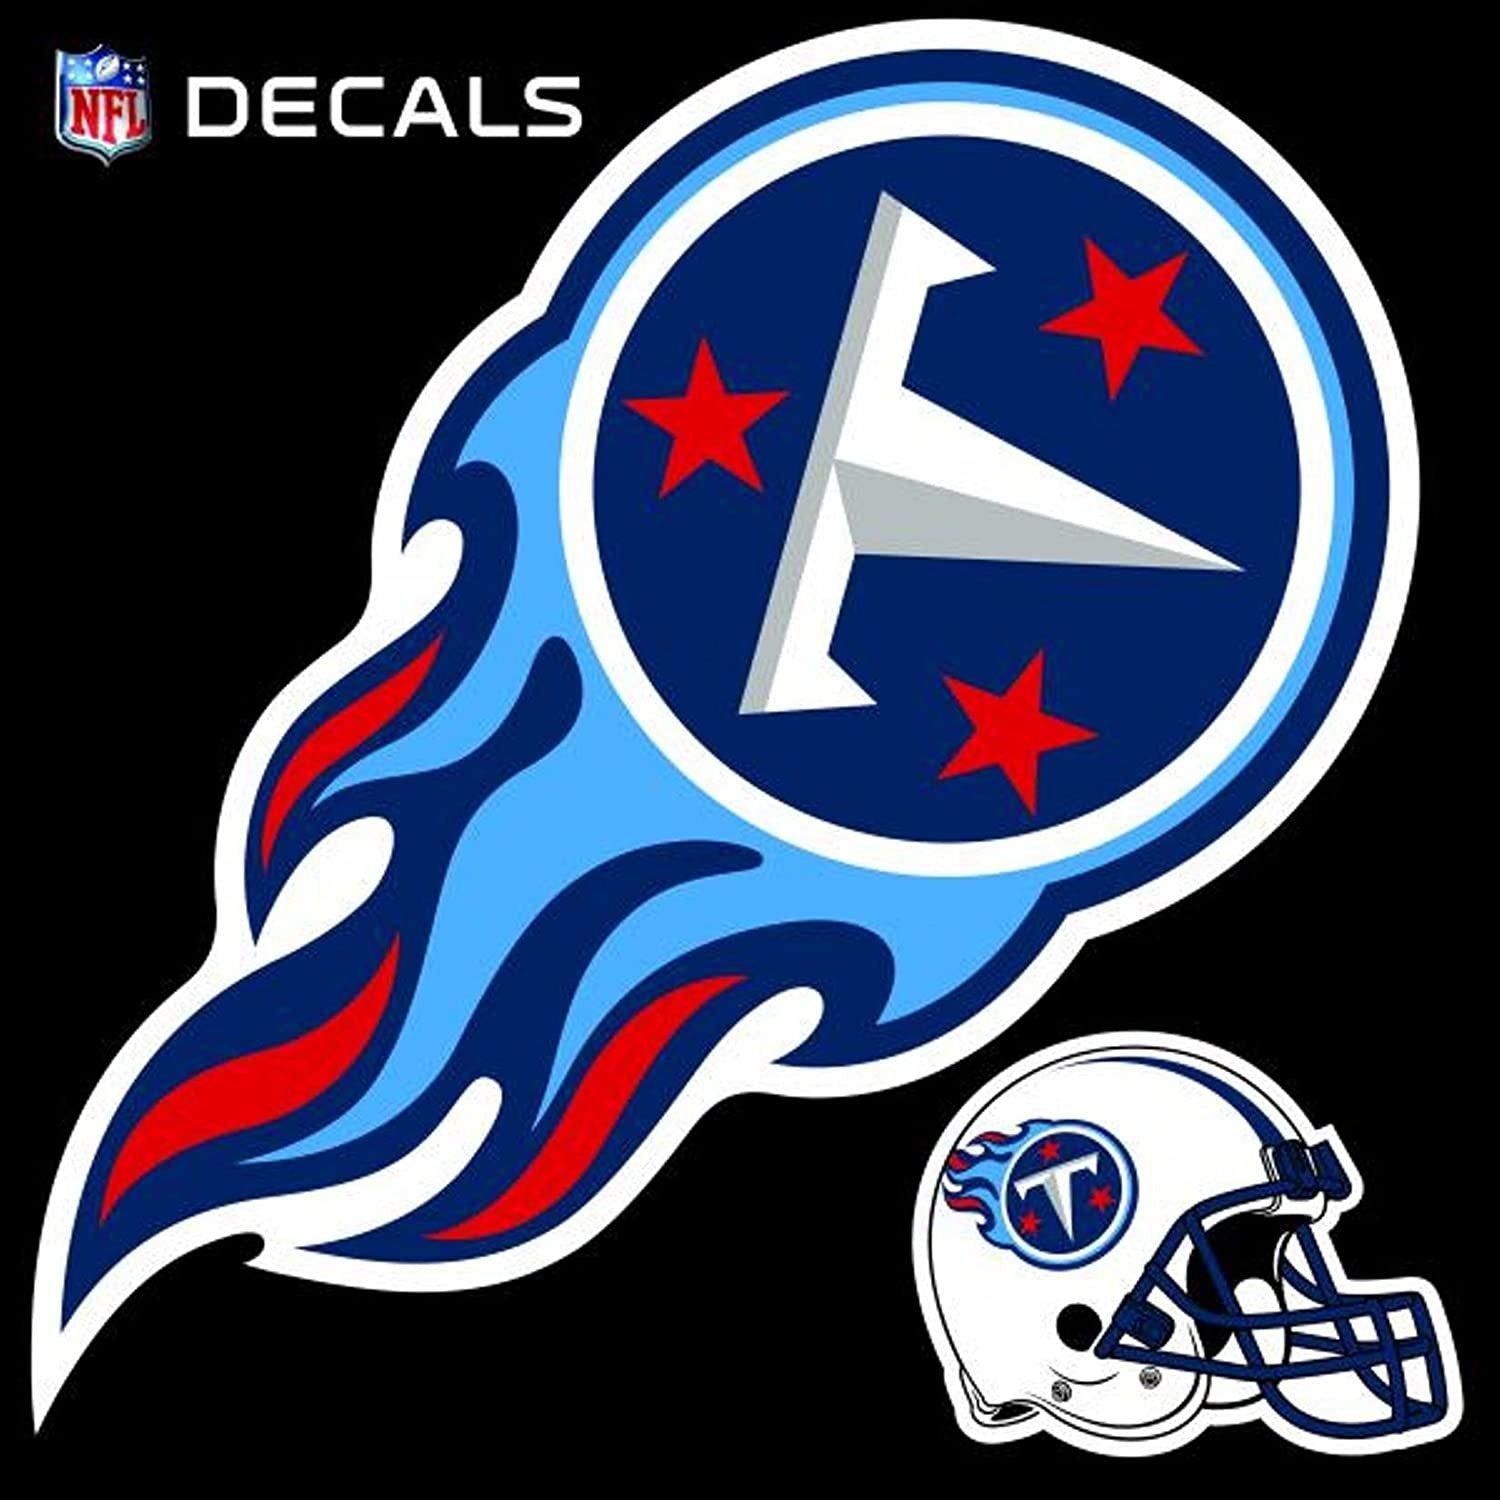 Tennessee Titans 8" LOGO Decal with BONUS DECAL Flat Vinyl Reusable Repositionable Auto Home Football